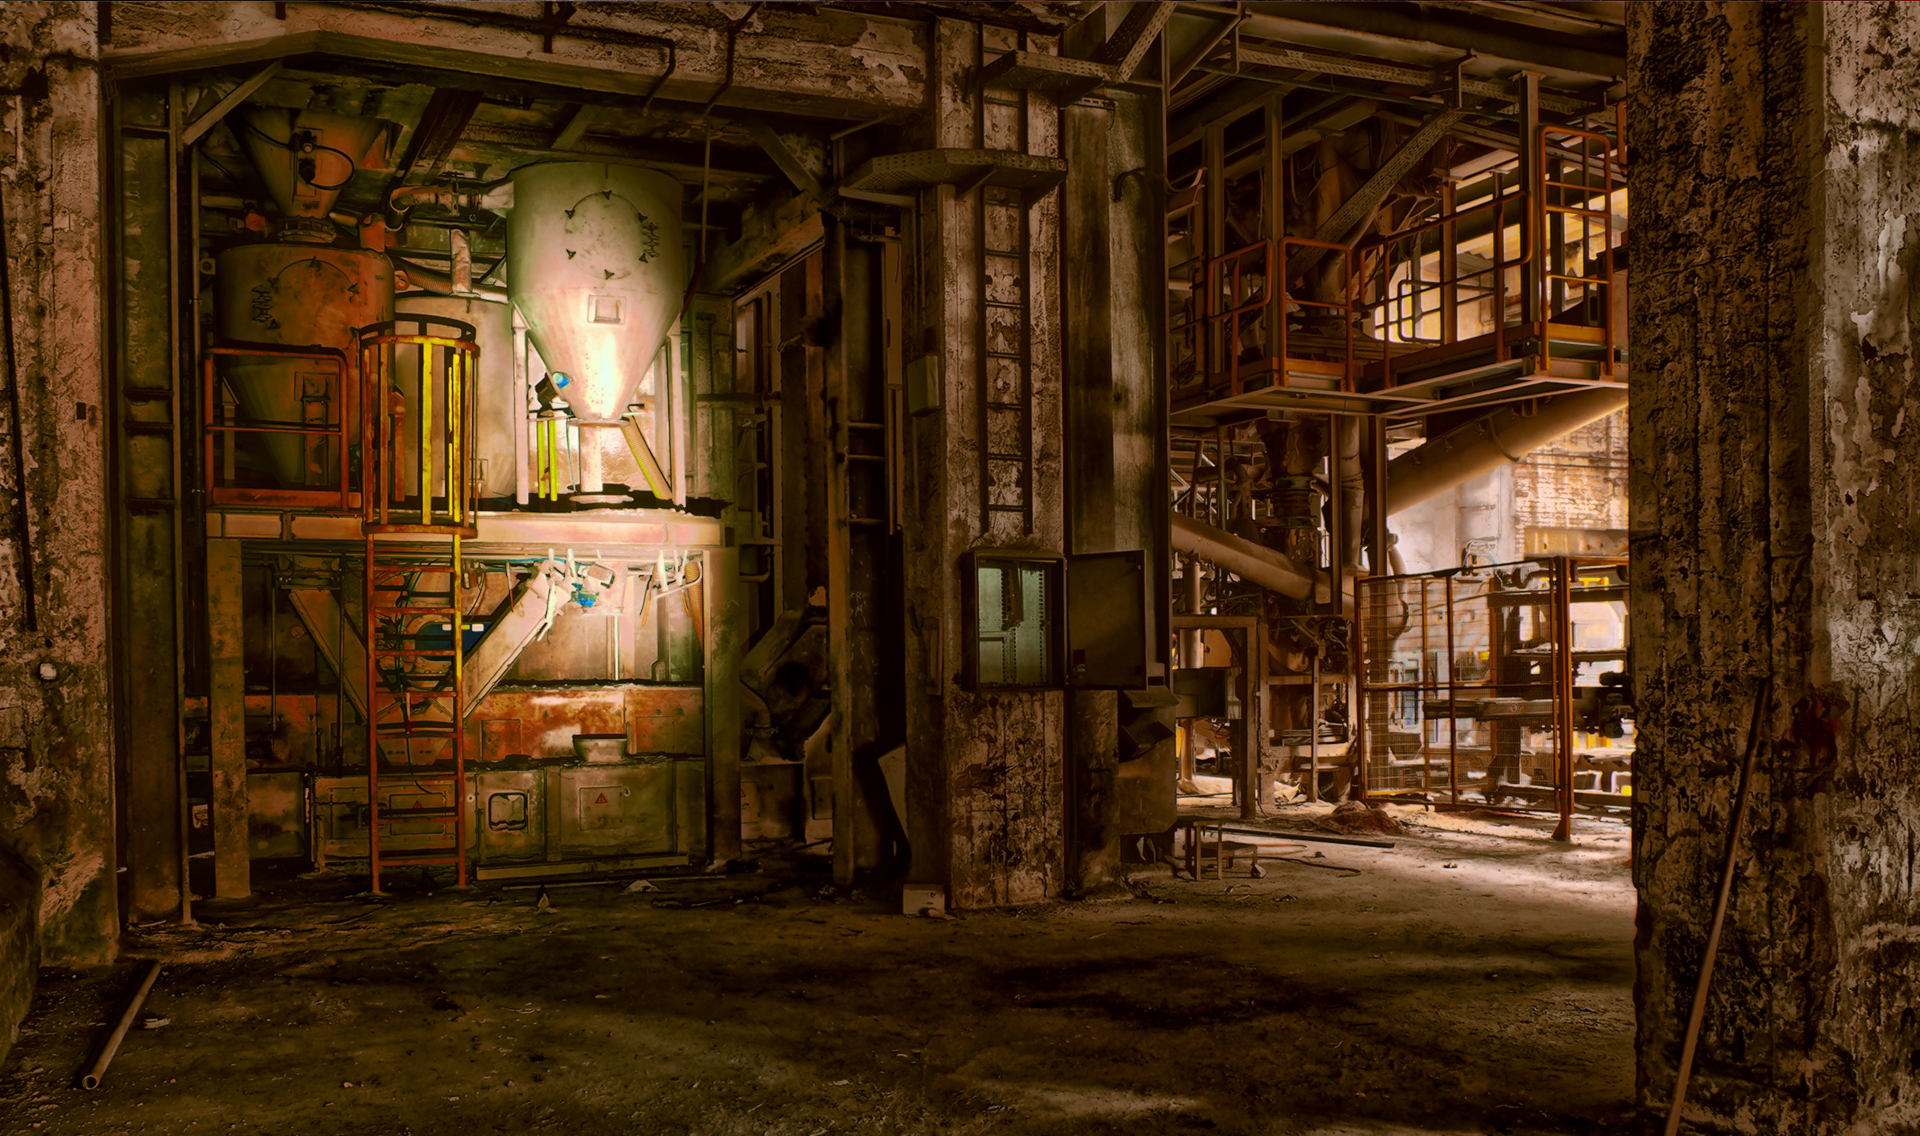 INT. ABANDONED FACTORY 3 – DAY